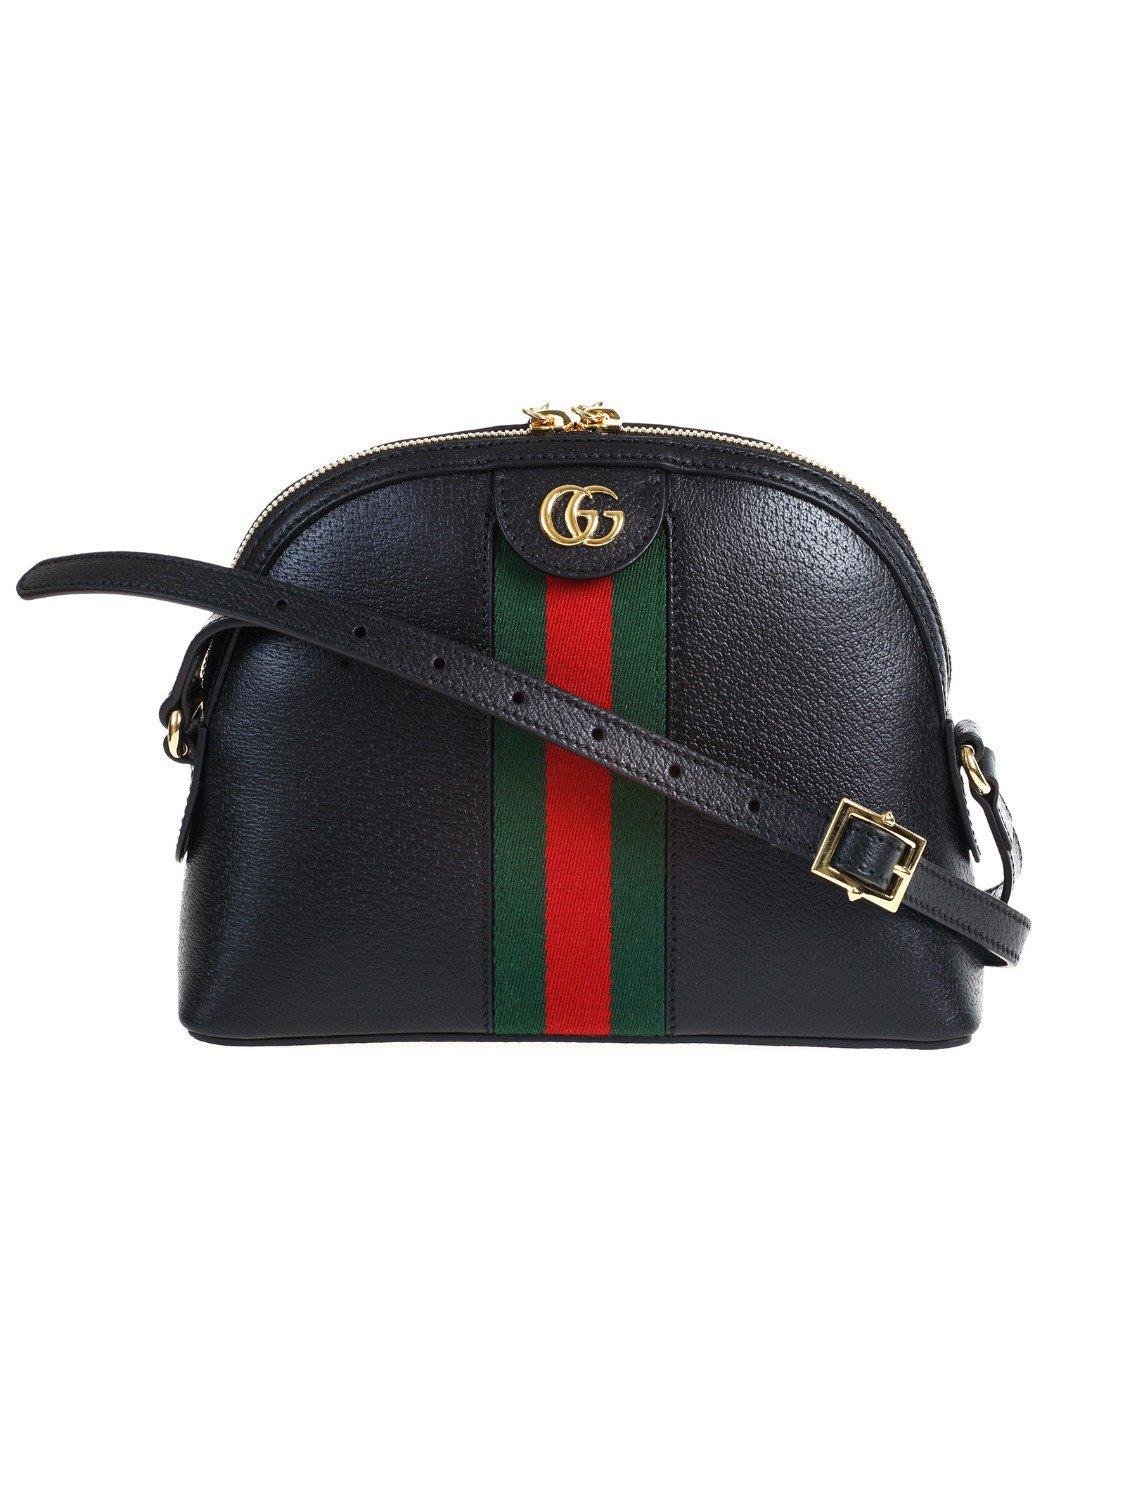 Gucci Ophidia Small Leather Shoulder Bag in Black - Save 15% - Lyst